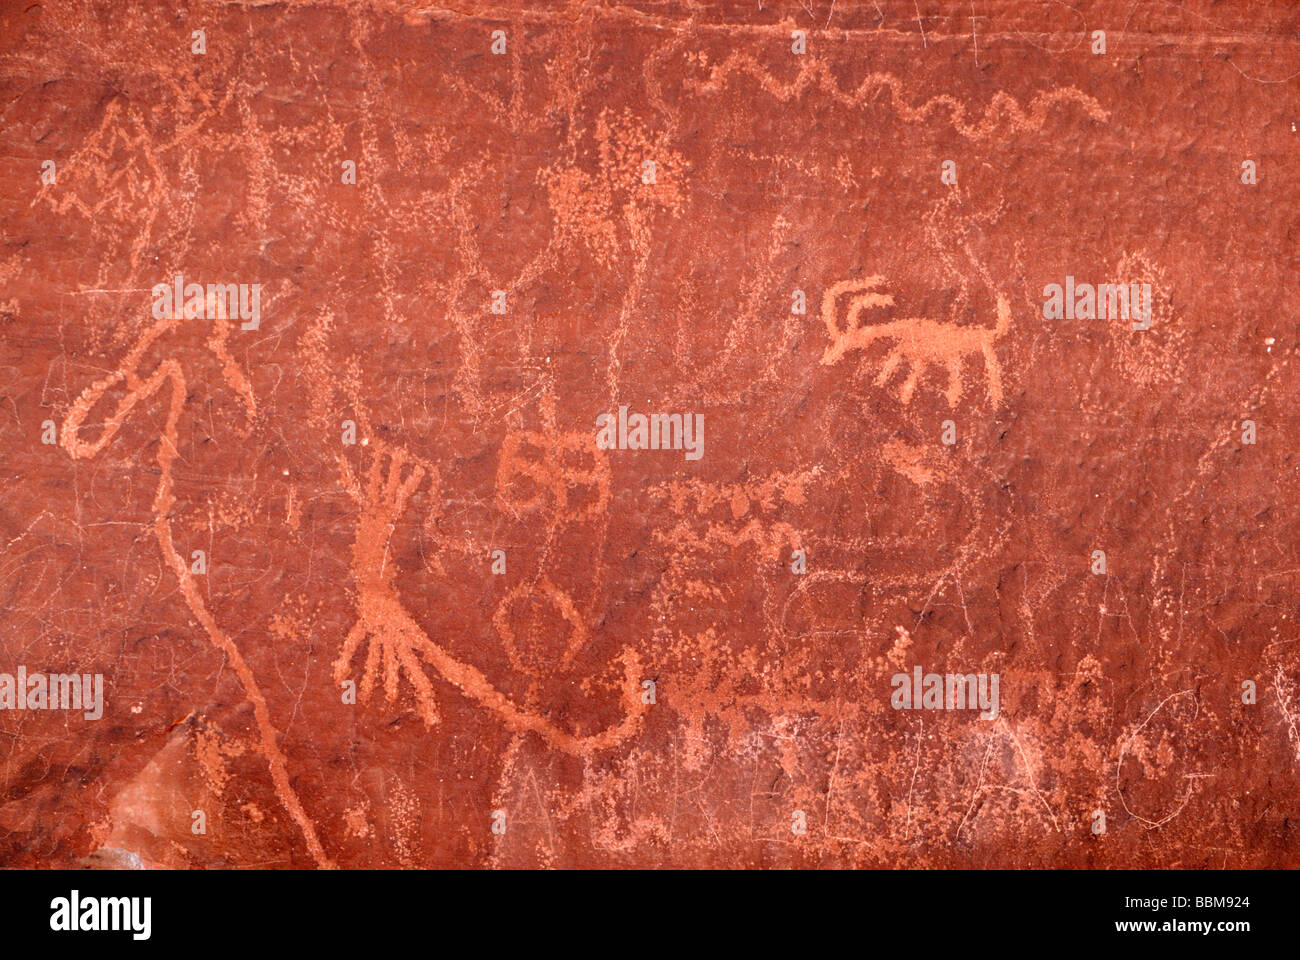 Historic stone etchings, petroglyphes, about 4000 years old, Atlatl Rock, Valley of Fire State Park, Nevada, USA Stock Photo